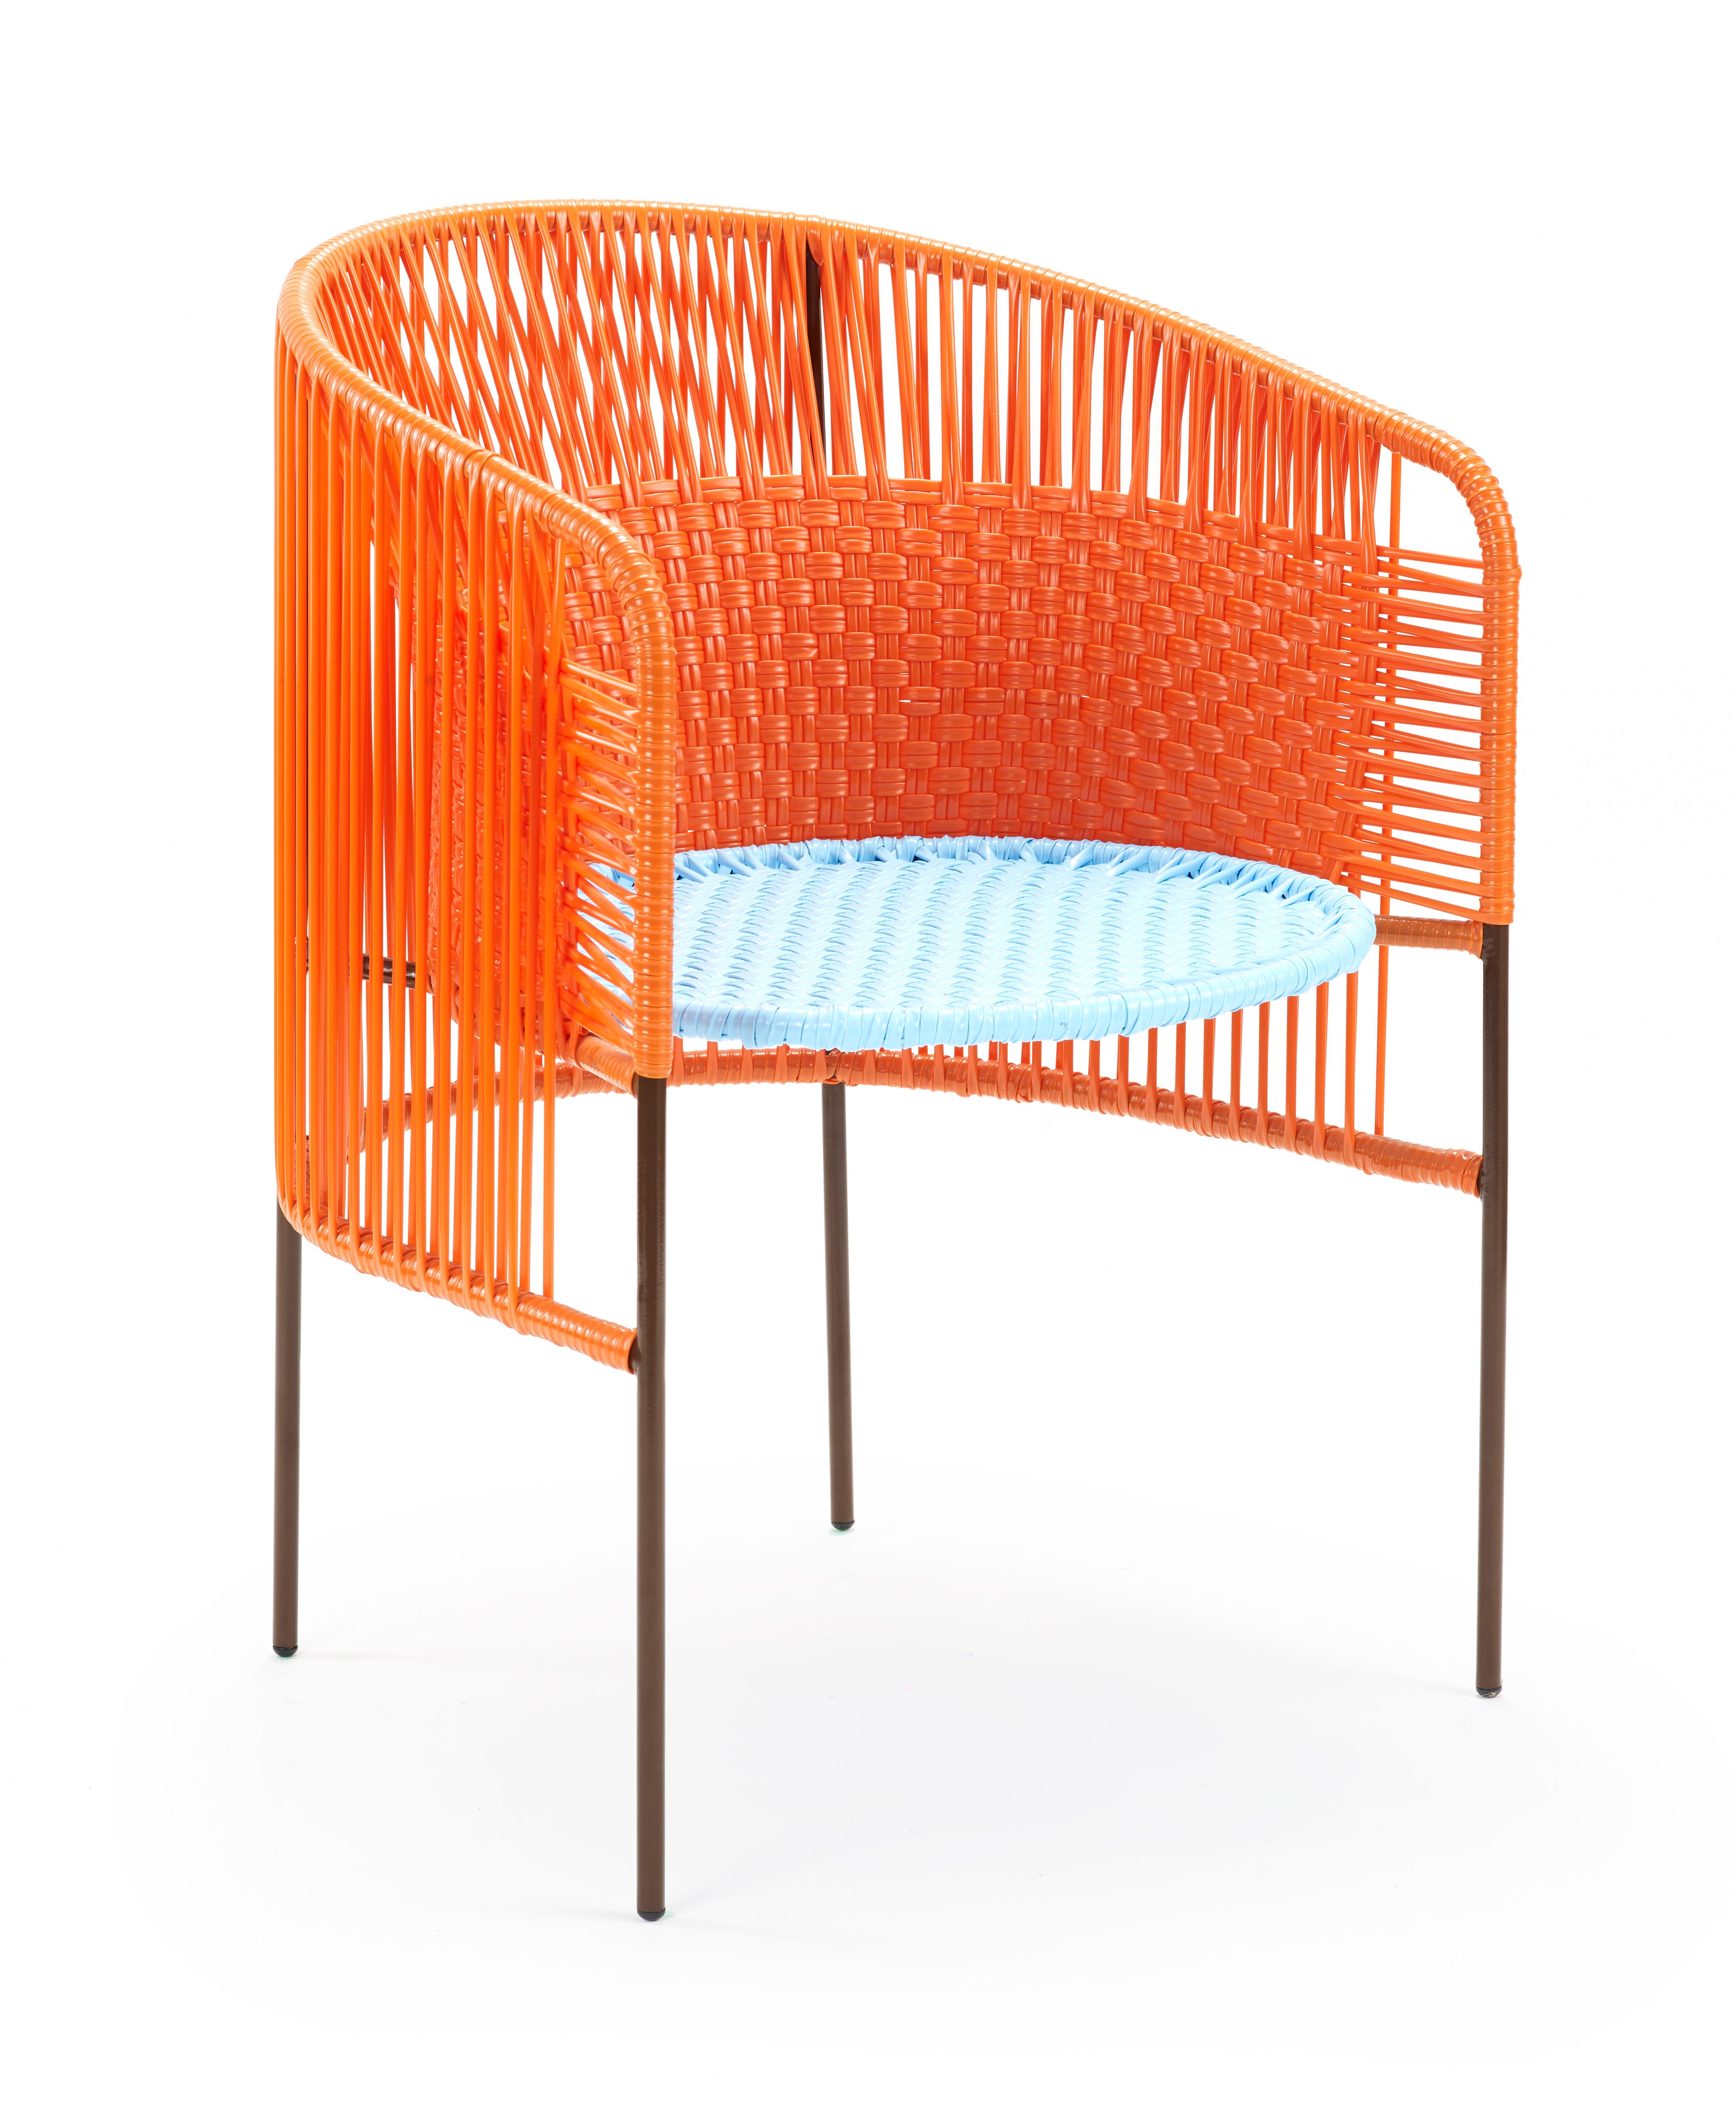 Orange mint caribe dining chair by Sebastian Herkner
Materials: Galvanized and powder-coated tubular steel. PVC strings are made from recycled plastic.
Technique: Made from recycled plastic and weaved by local craftspeople in Colombia.